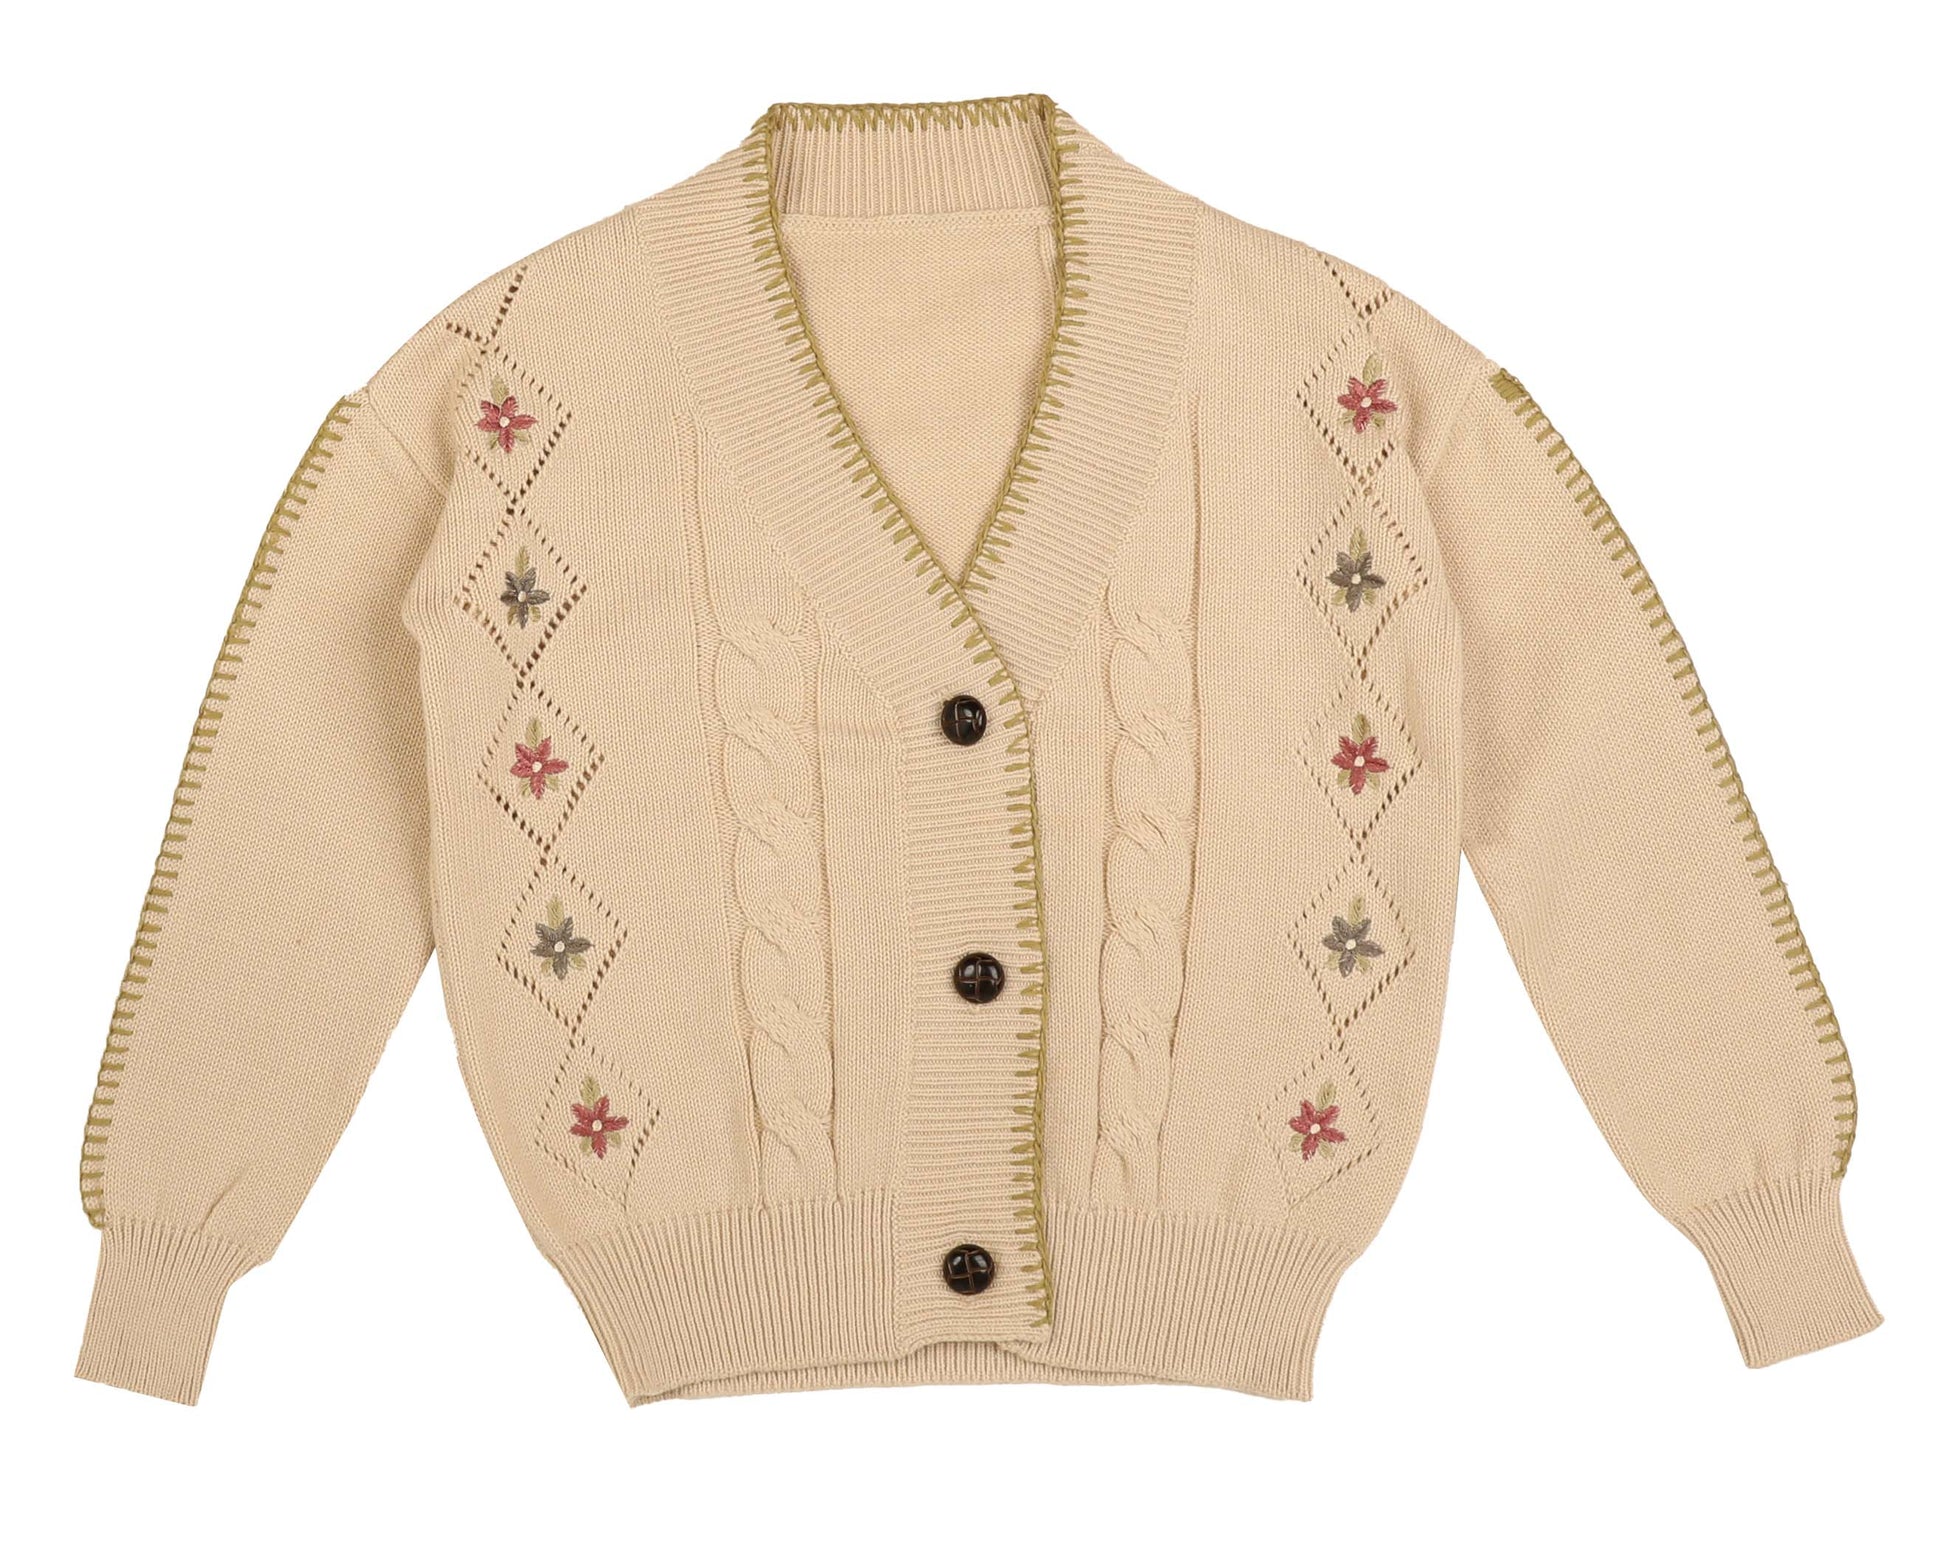 Knit Cardigan with Embroidery - Beige/floral - Ladies